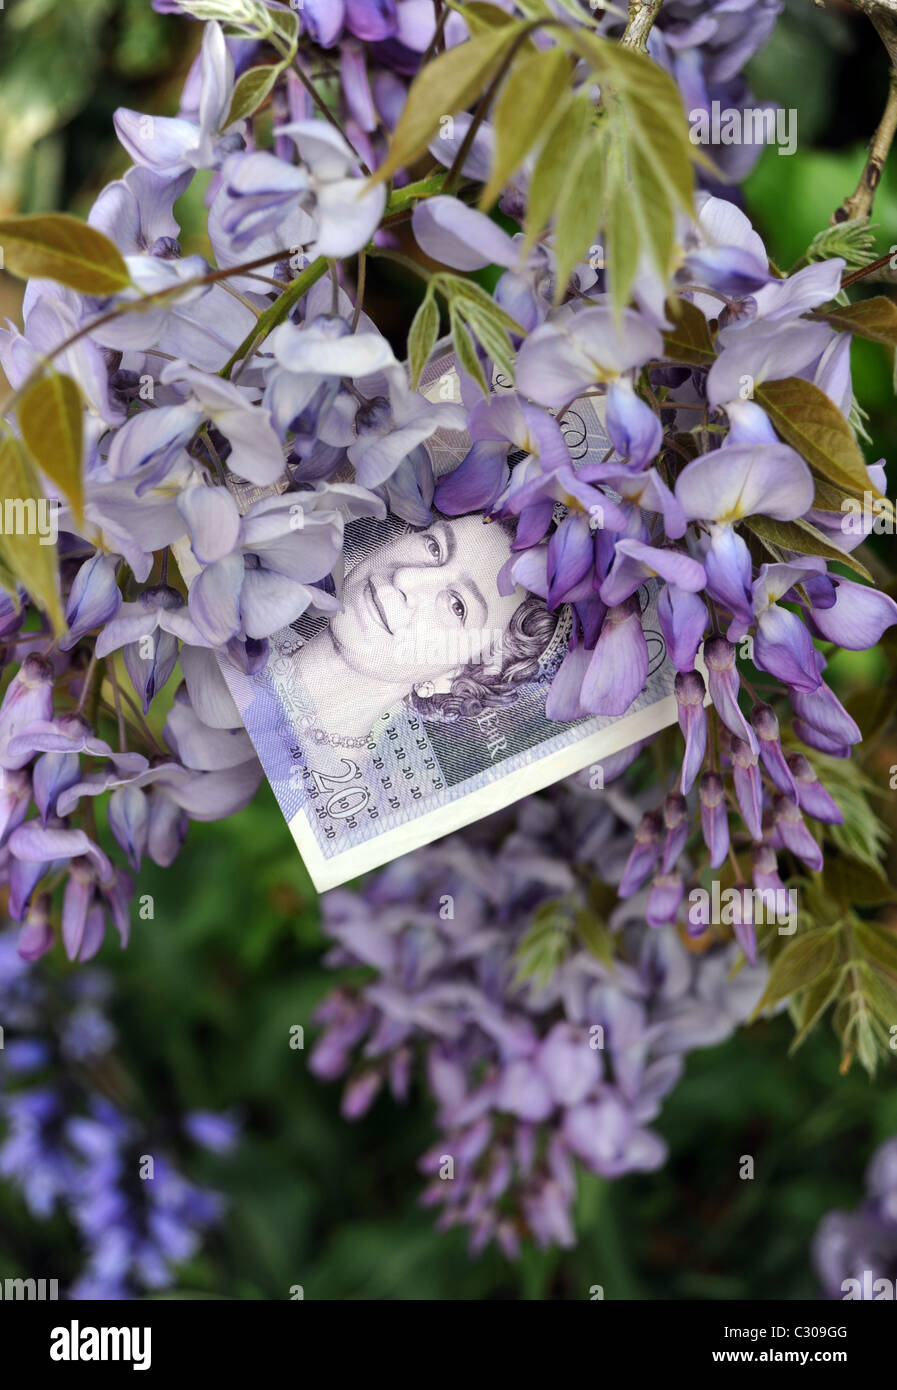 BRITISH £20 POUND NOTE IN BLOOMING  WISTERIA  PLANT RE ECONOMY  FINANCE MONEY BILLS SAVINGS CASH BUDGETS GROWTH  ETC UK Stock Photo